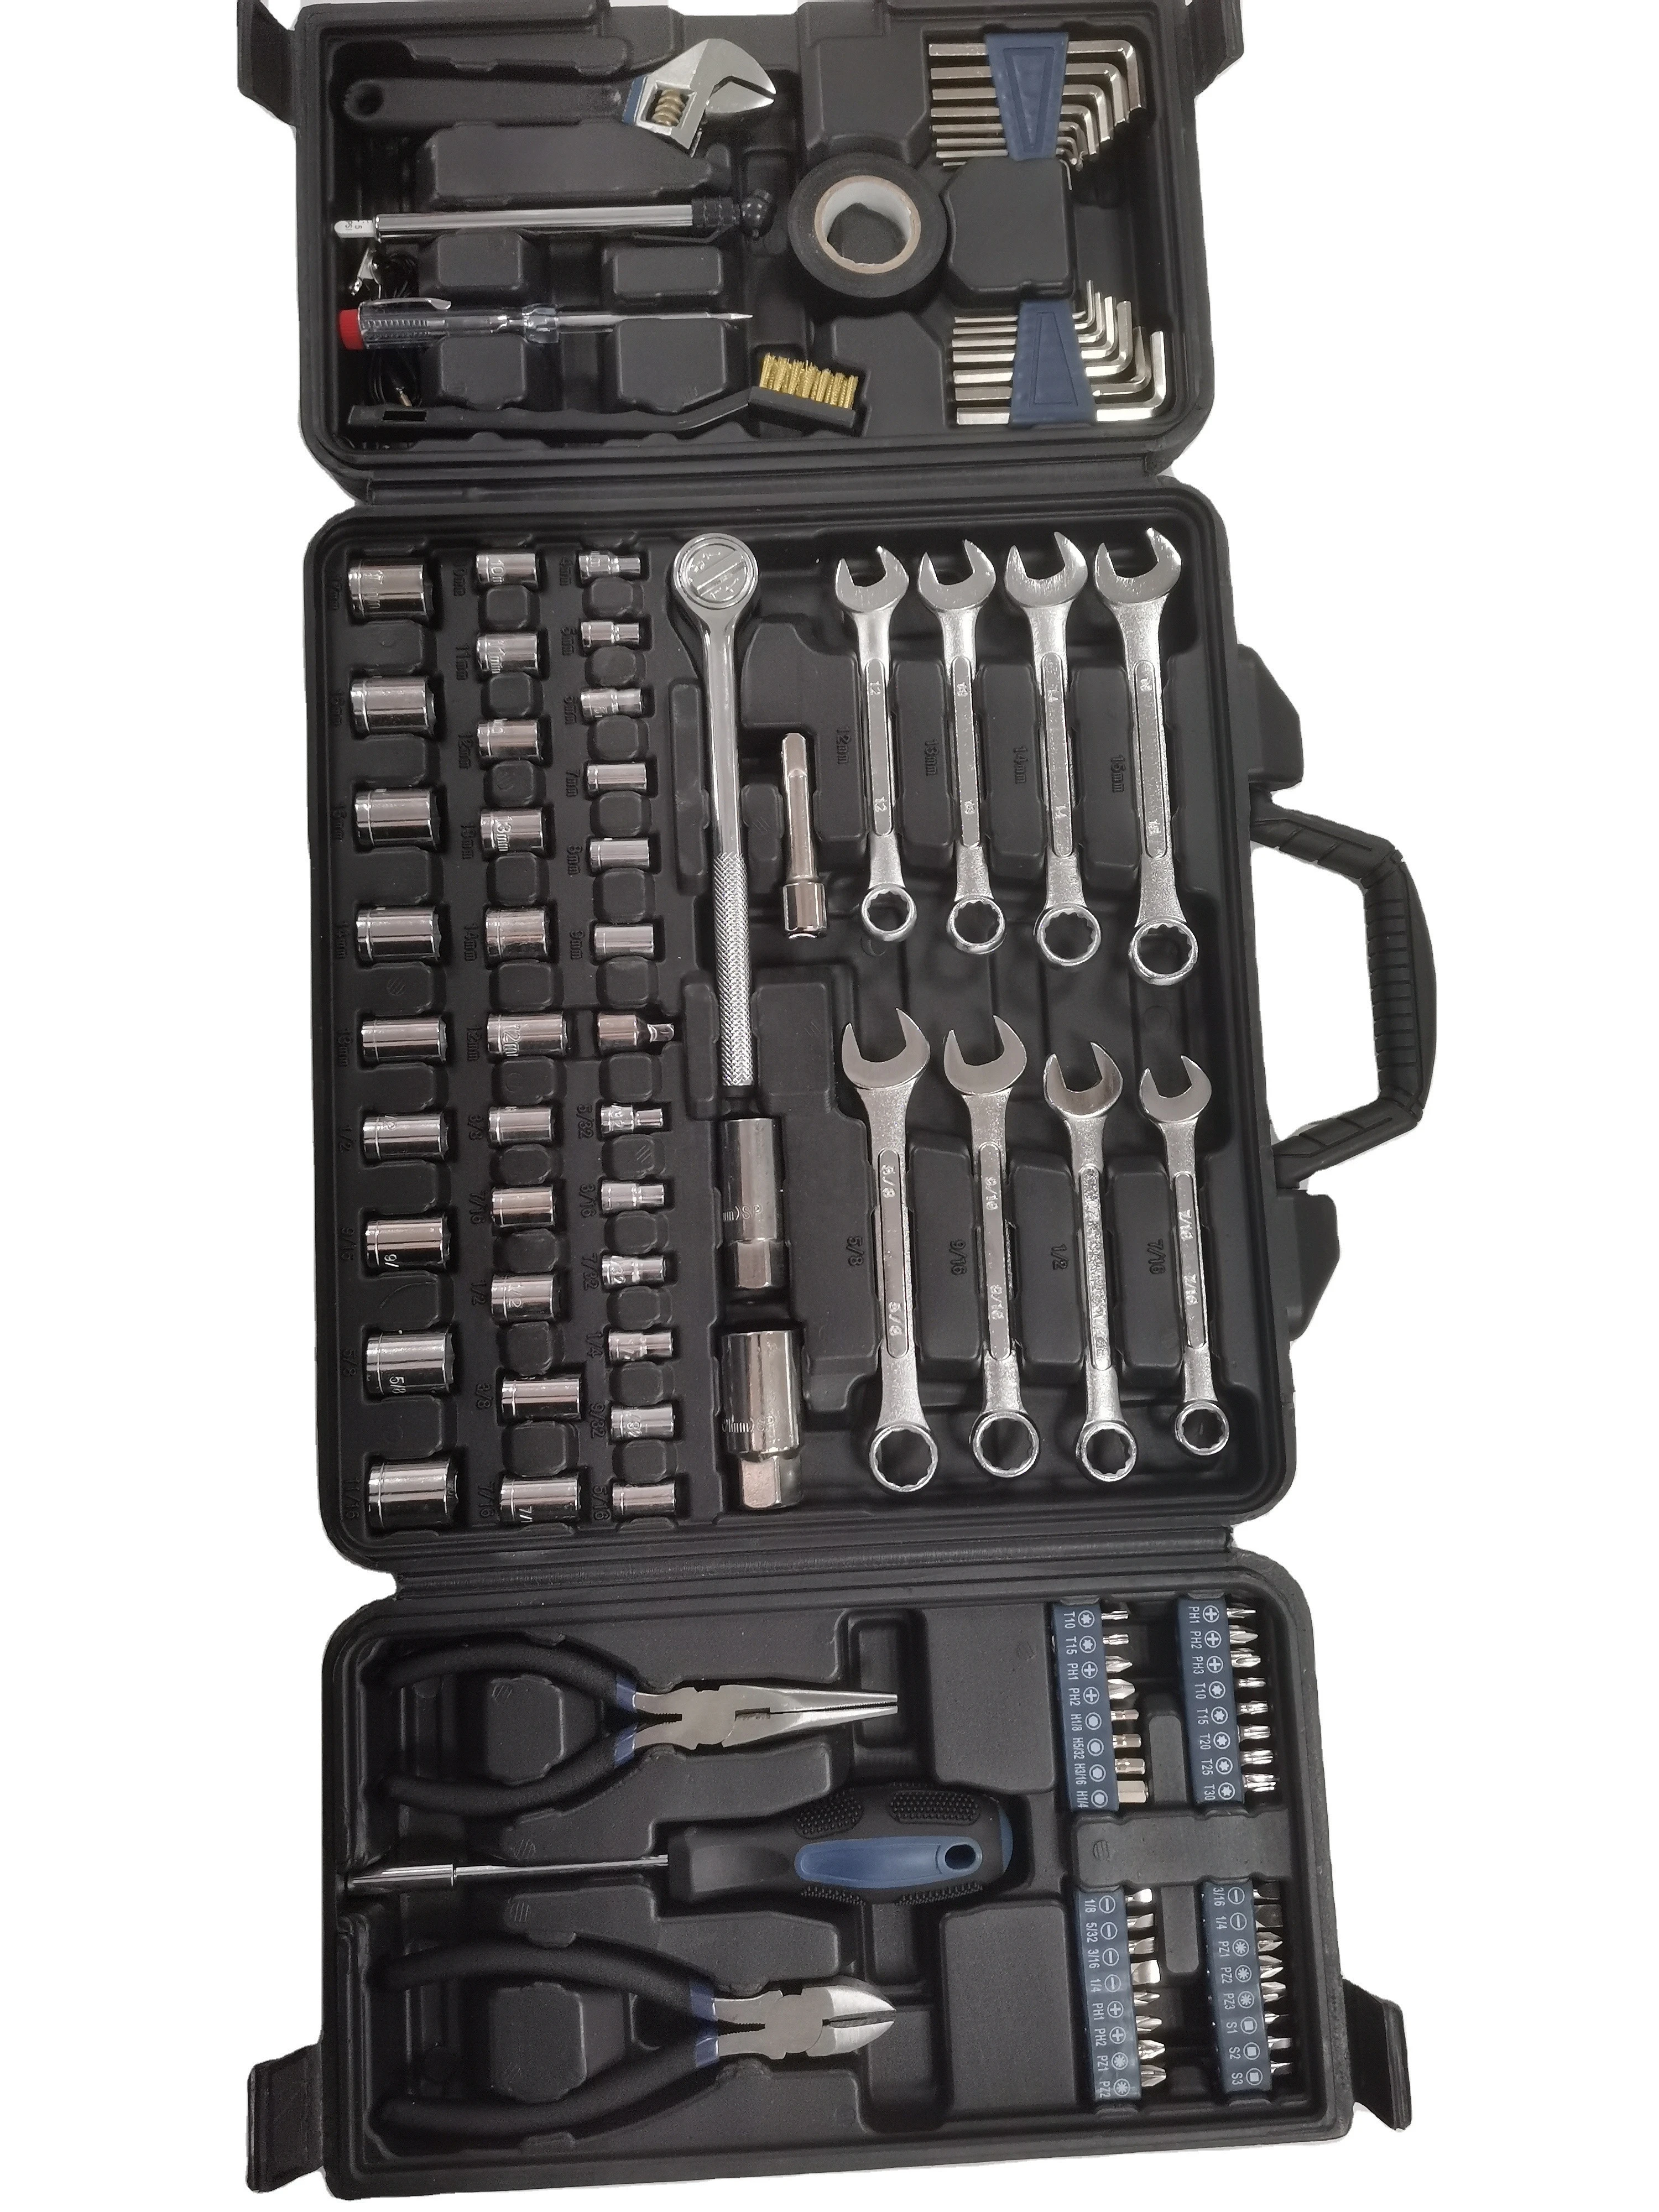 The cheapest 101pcs Mechanic Repairing and Household Tools Set